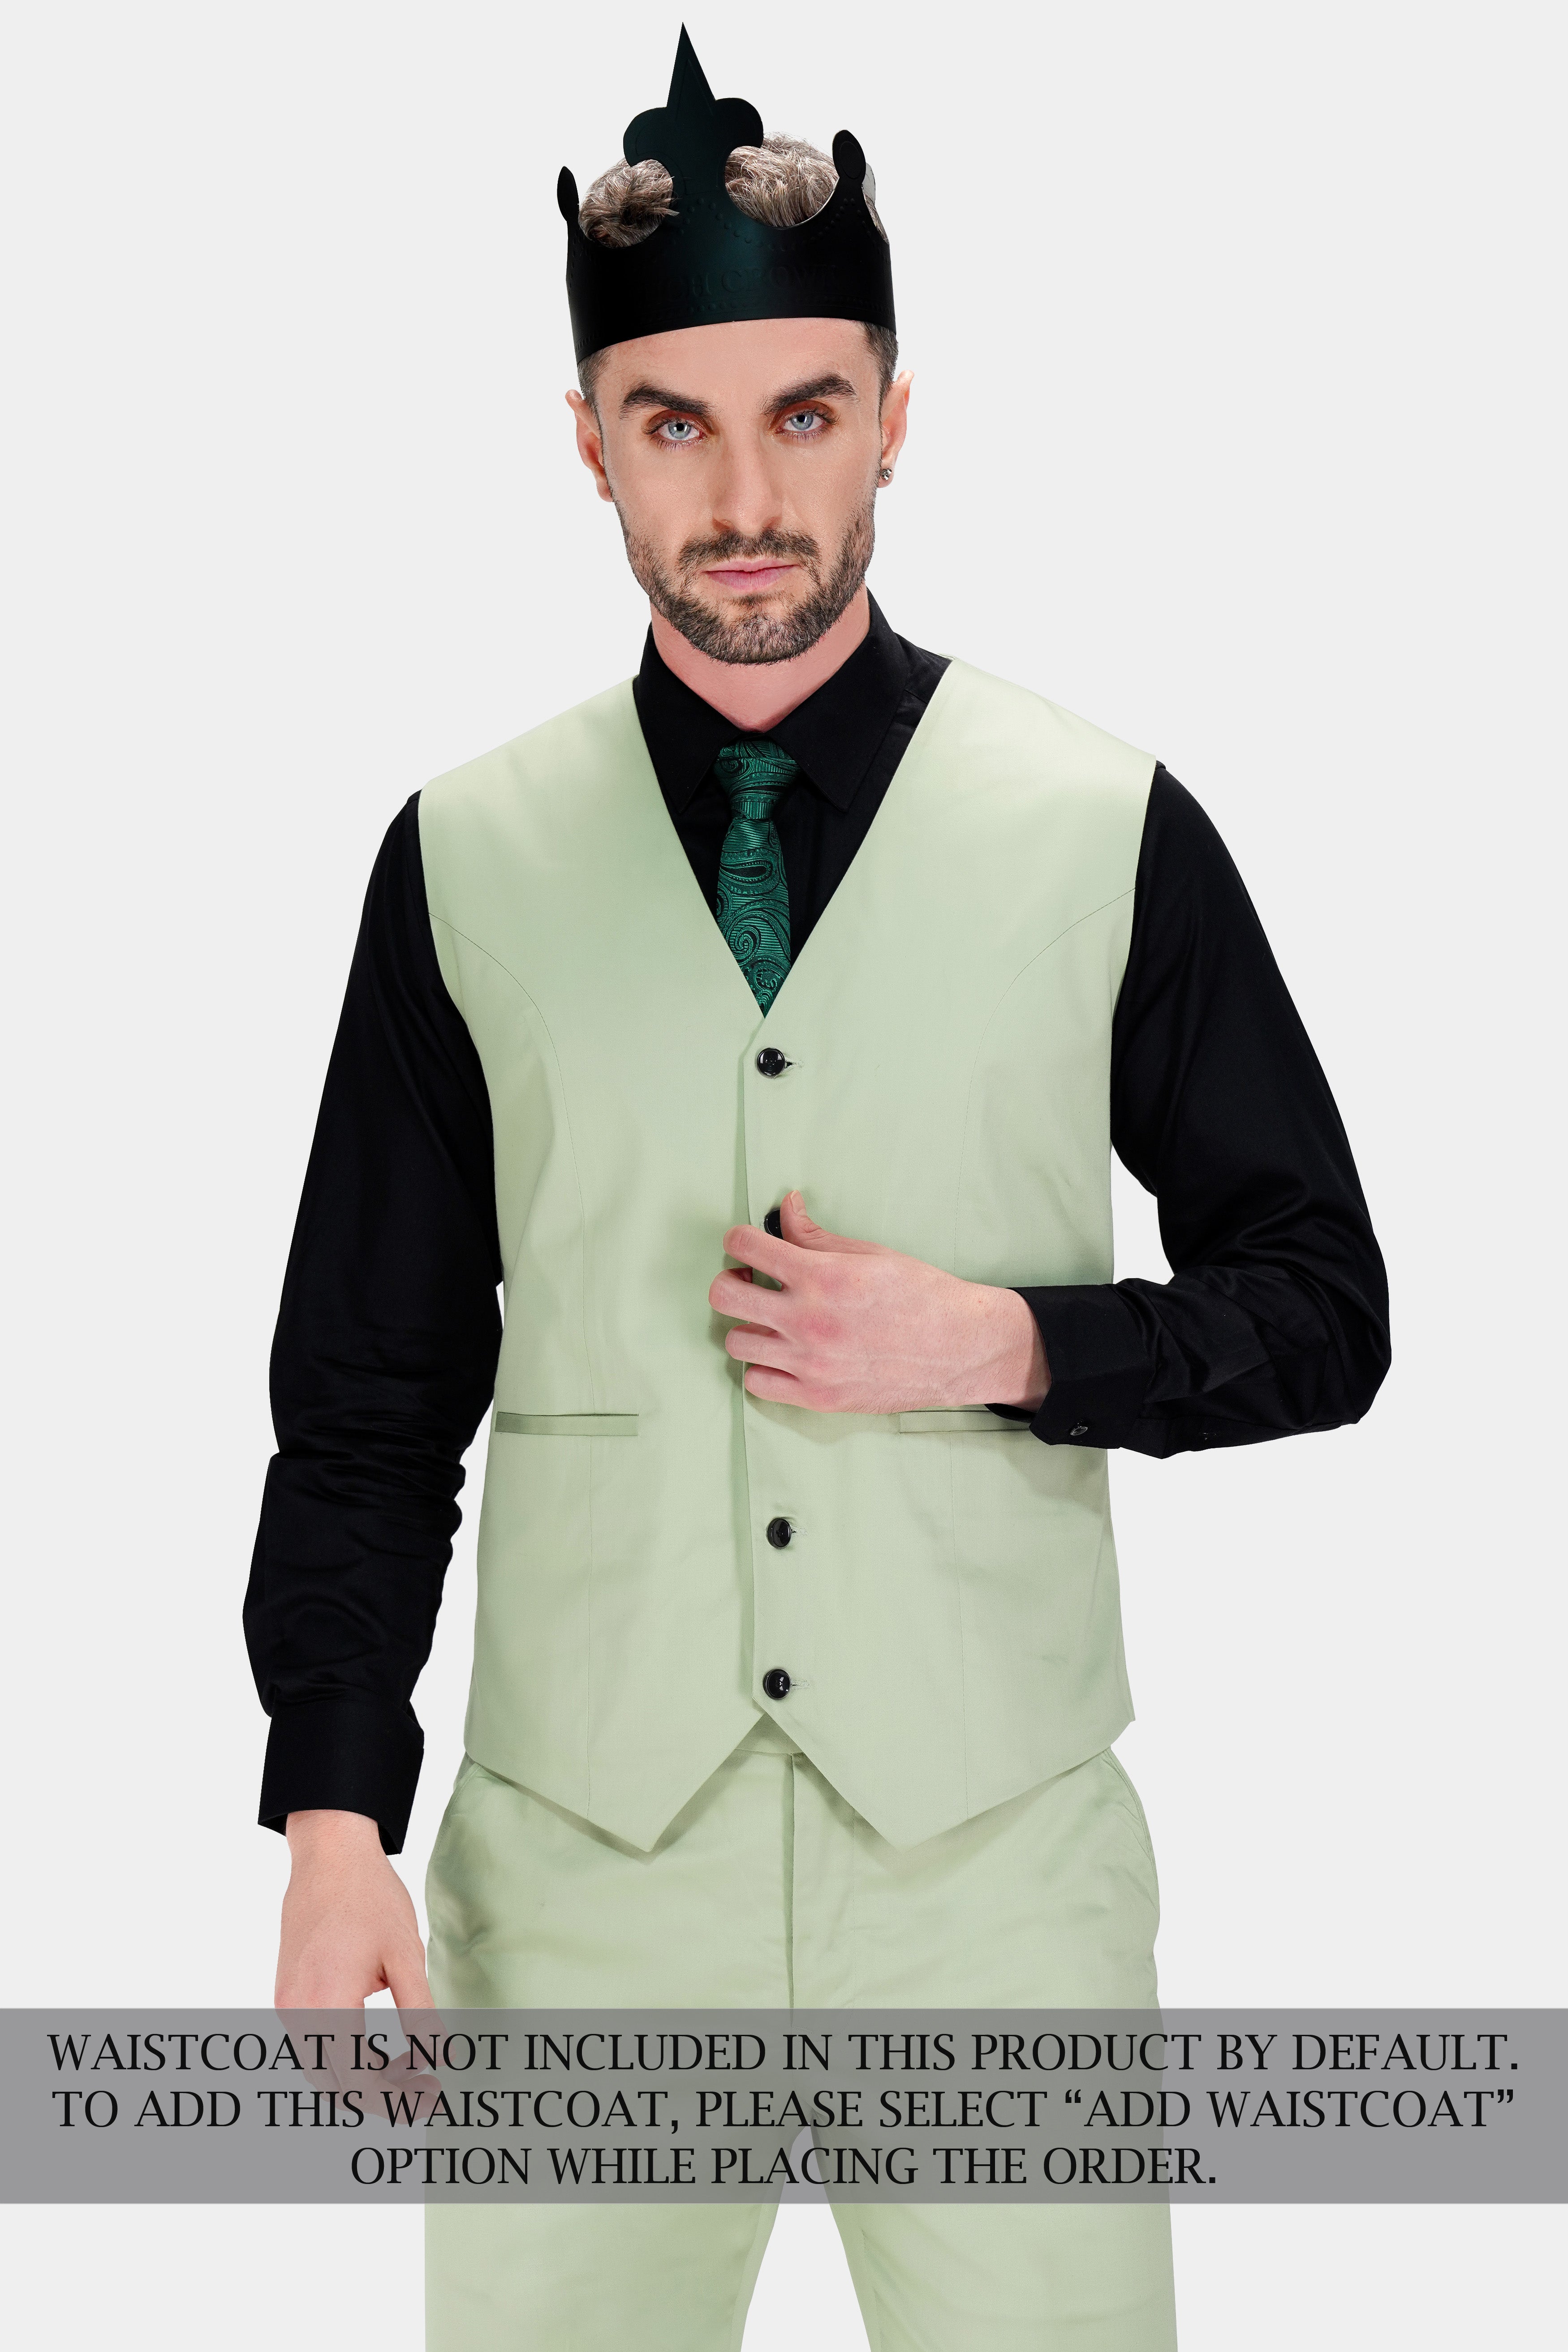 Coriander Green Double Breasted Premium Cotton Stretchable traveler Suit ST2793-DB36, ST2793-DB38, ST2793-DB40, ST2793-DB42, ST2793-DB44, ST2793-DB46, ST2793-DB48, ST2793-DB50, ST2793-DB52, ST2793-DB54, ST2793-DB56, ST2793-DB58, ST2793-DB60